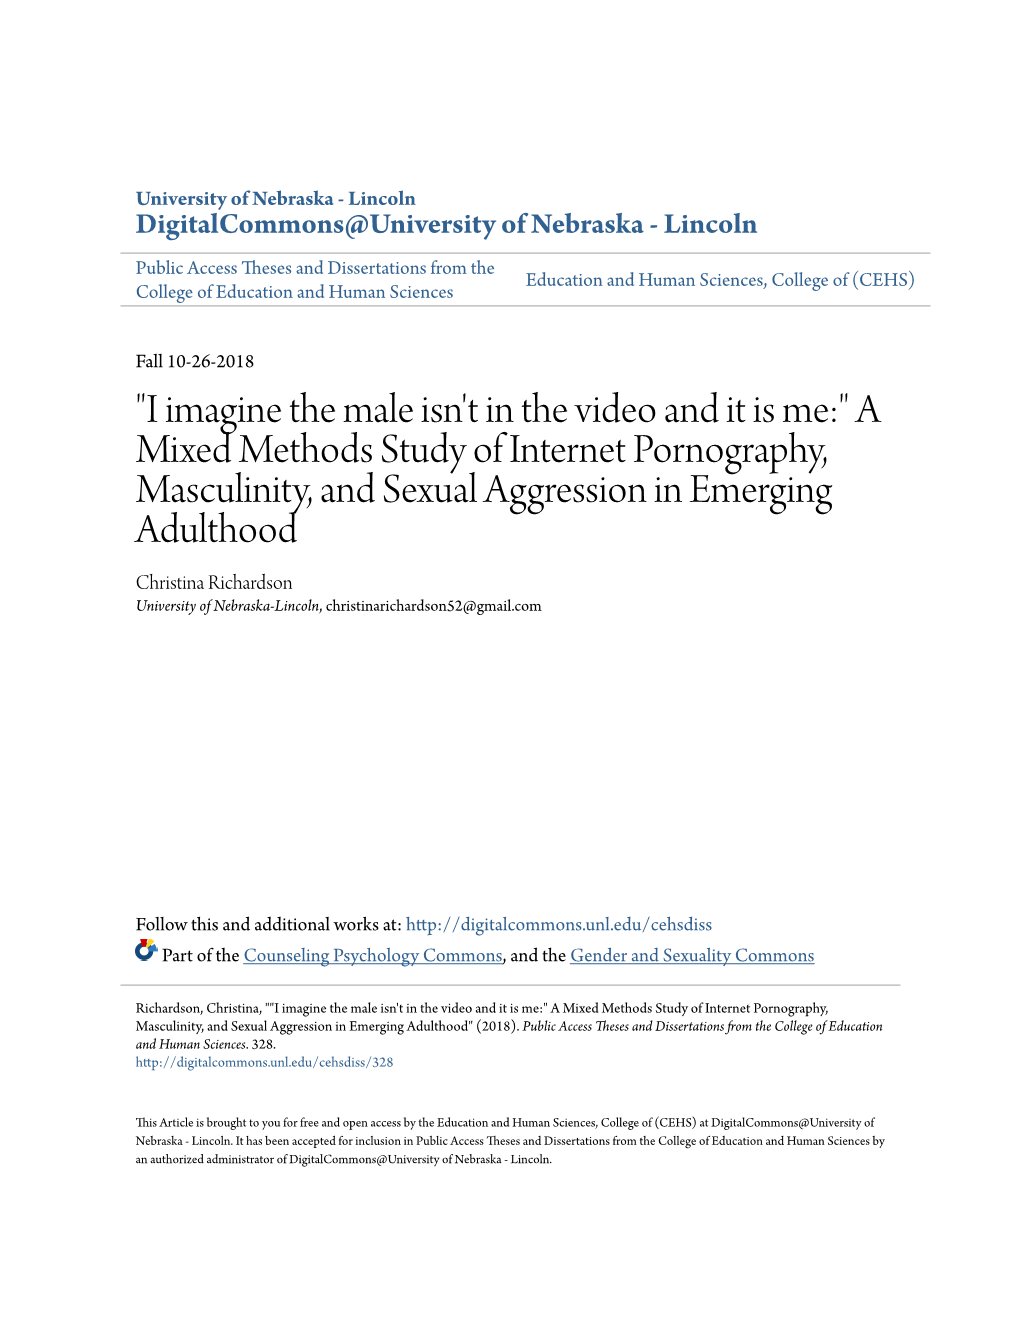 A Mixed Methods Study of Internet Pornography, Masculinity